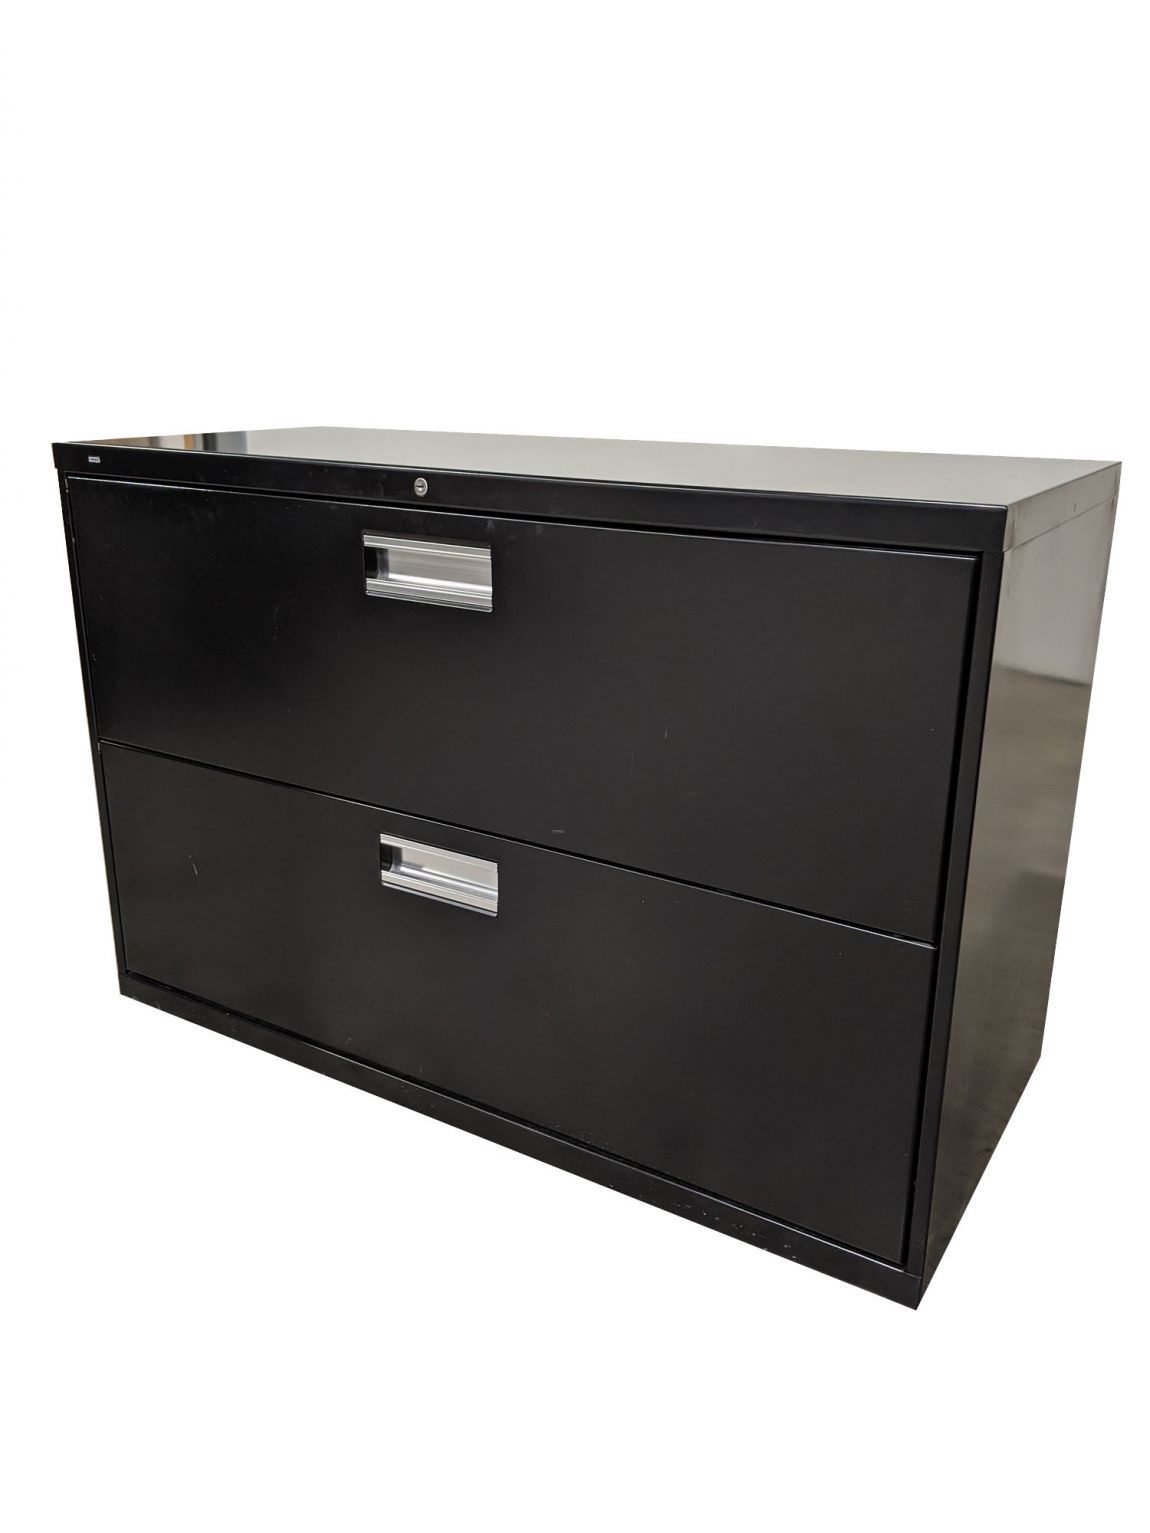 Black Hon 2 Drawer Lateral Filing Cabinet – 42 Inch Wide